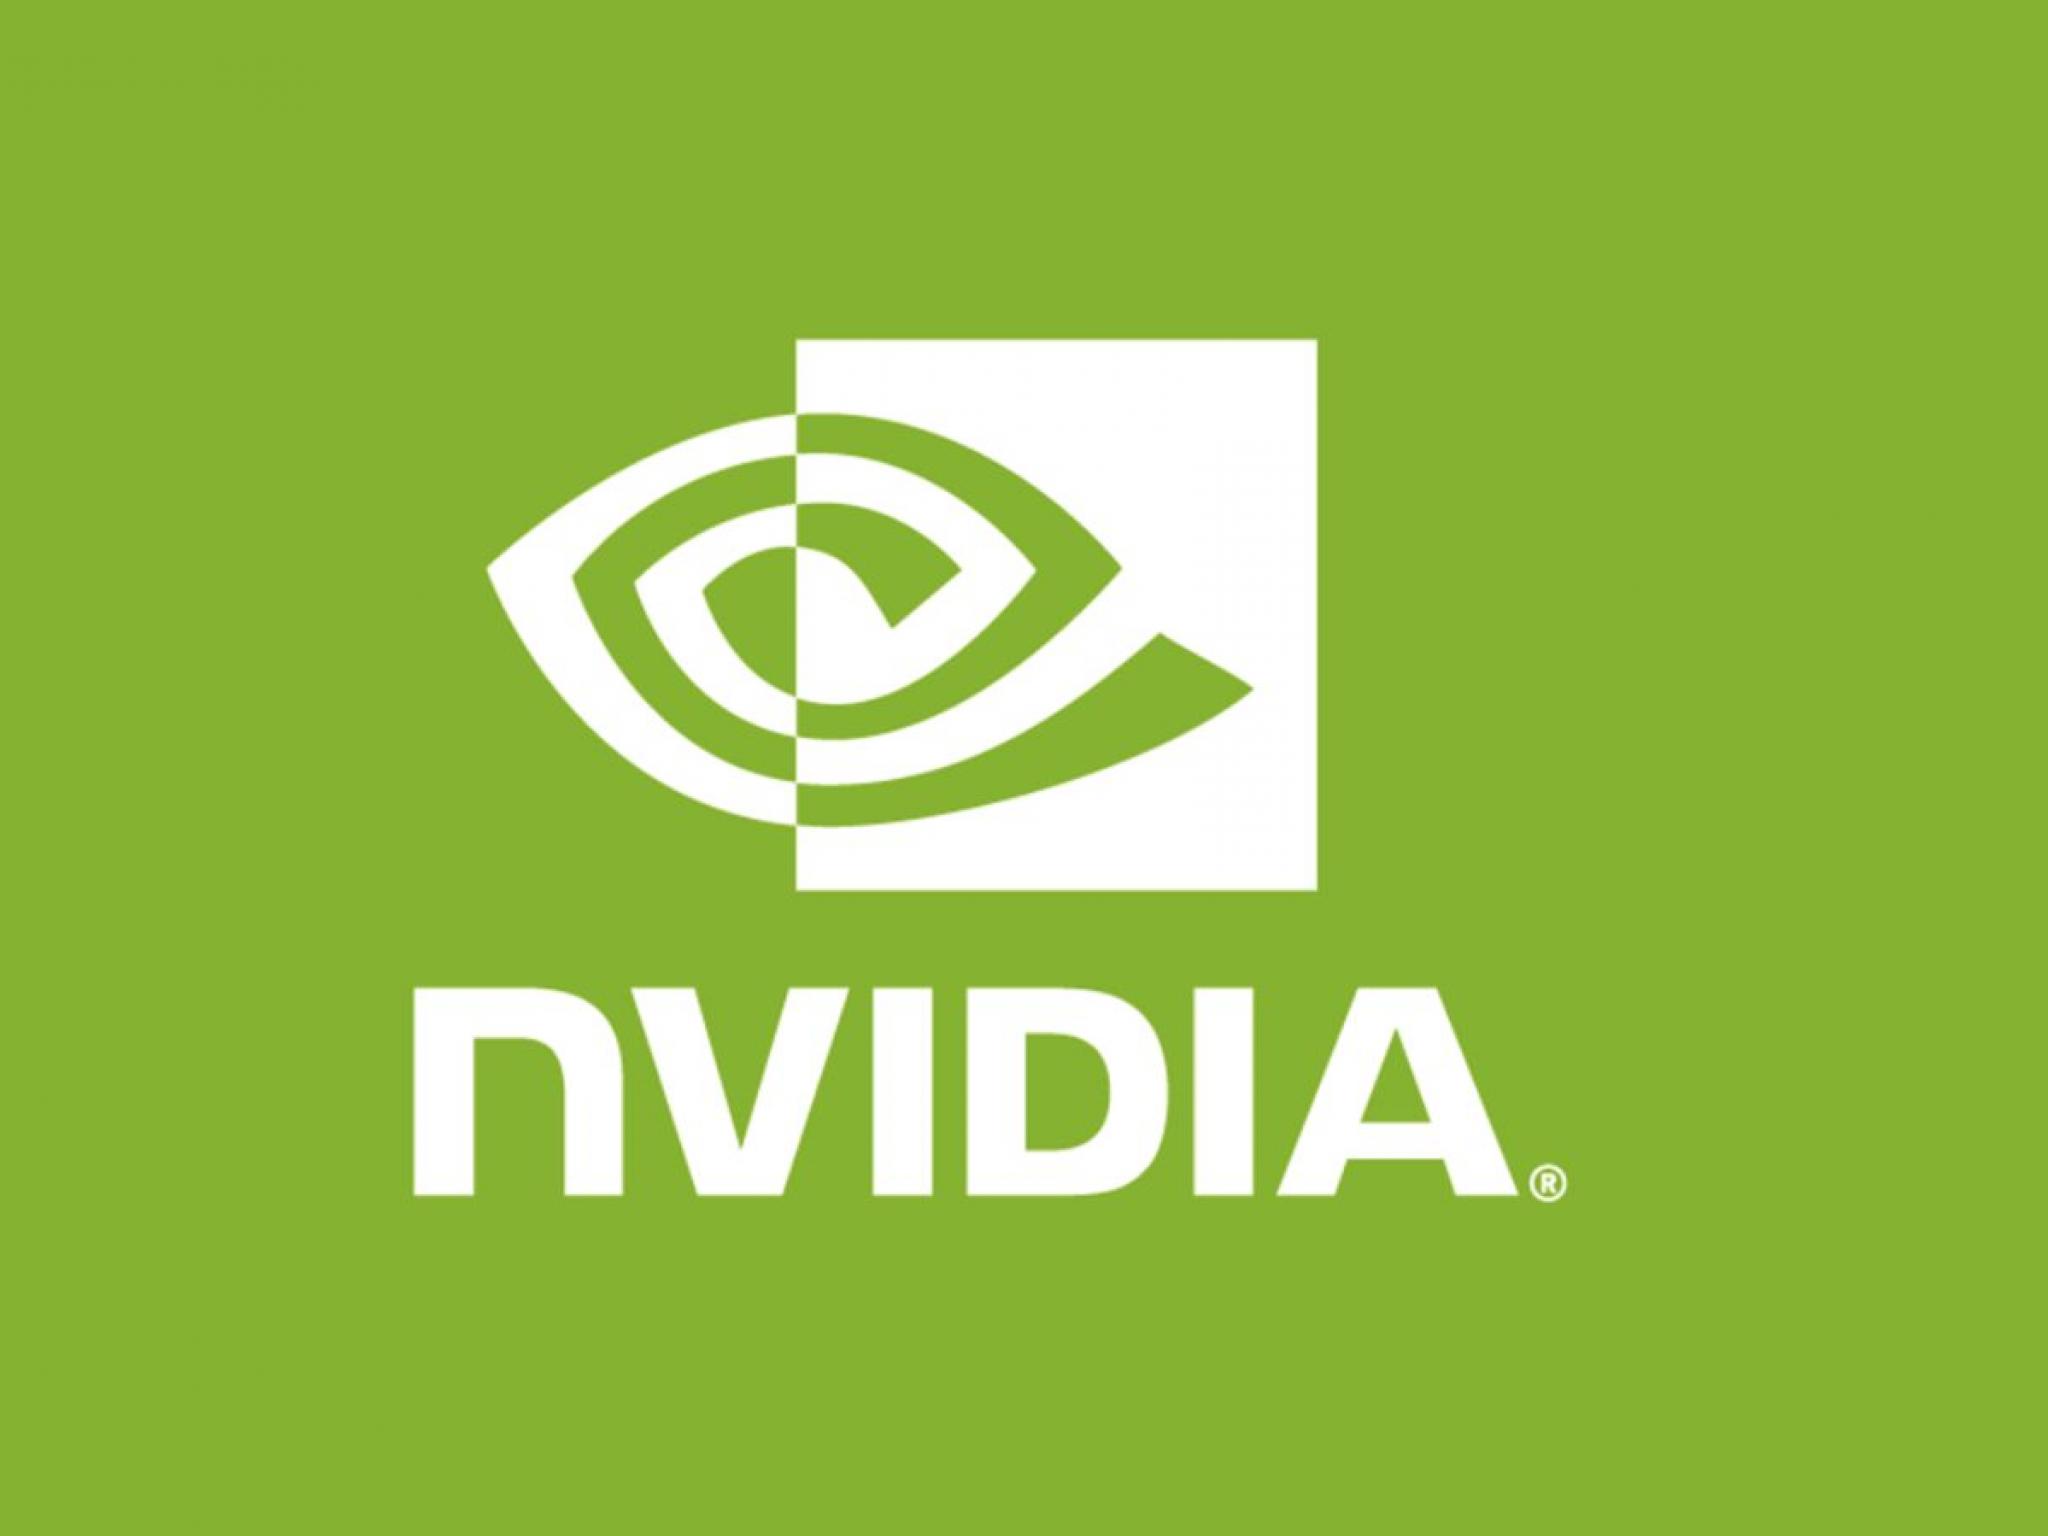  nvidia-to-rally-over-16-here-are-10-other-analyst-forecasts-for-friday 